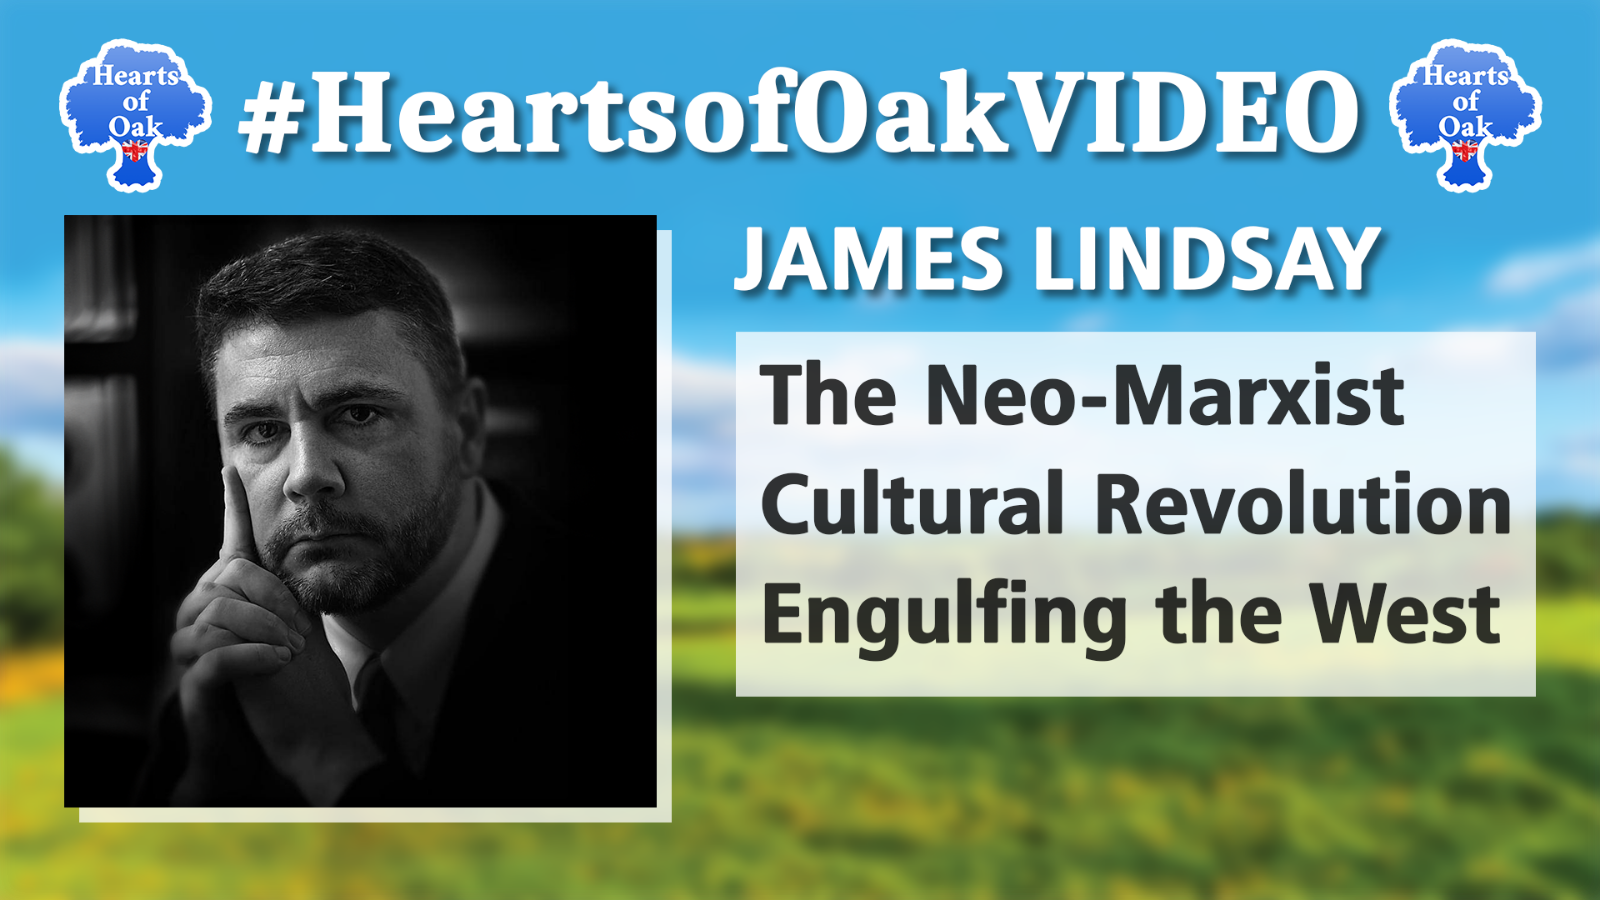 James Lindsay - The Neo-Marxist Cultural Revolution Engulfing the West